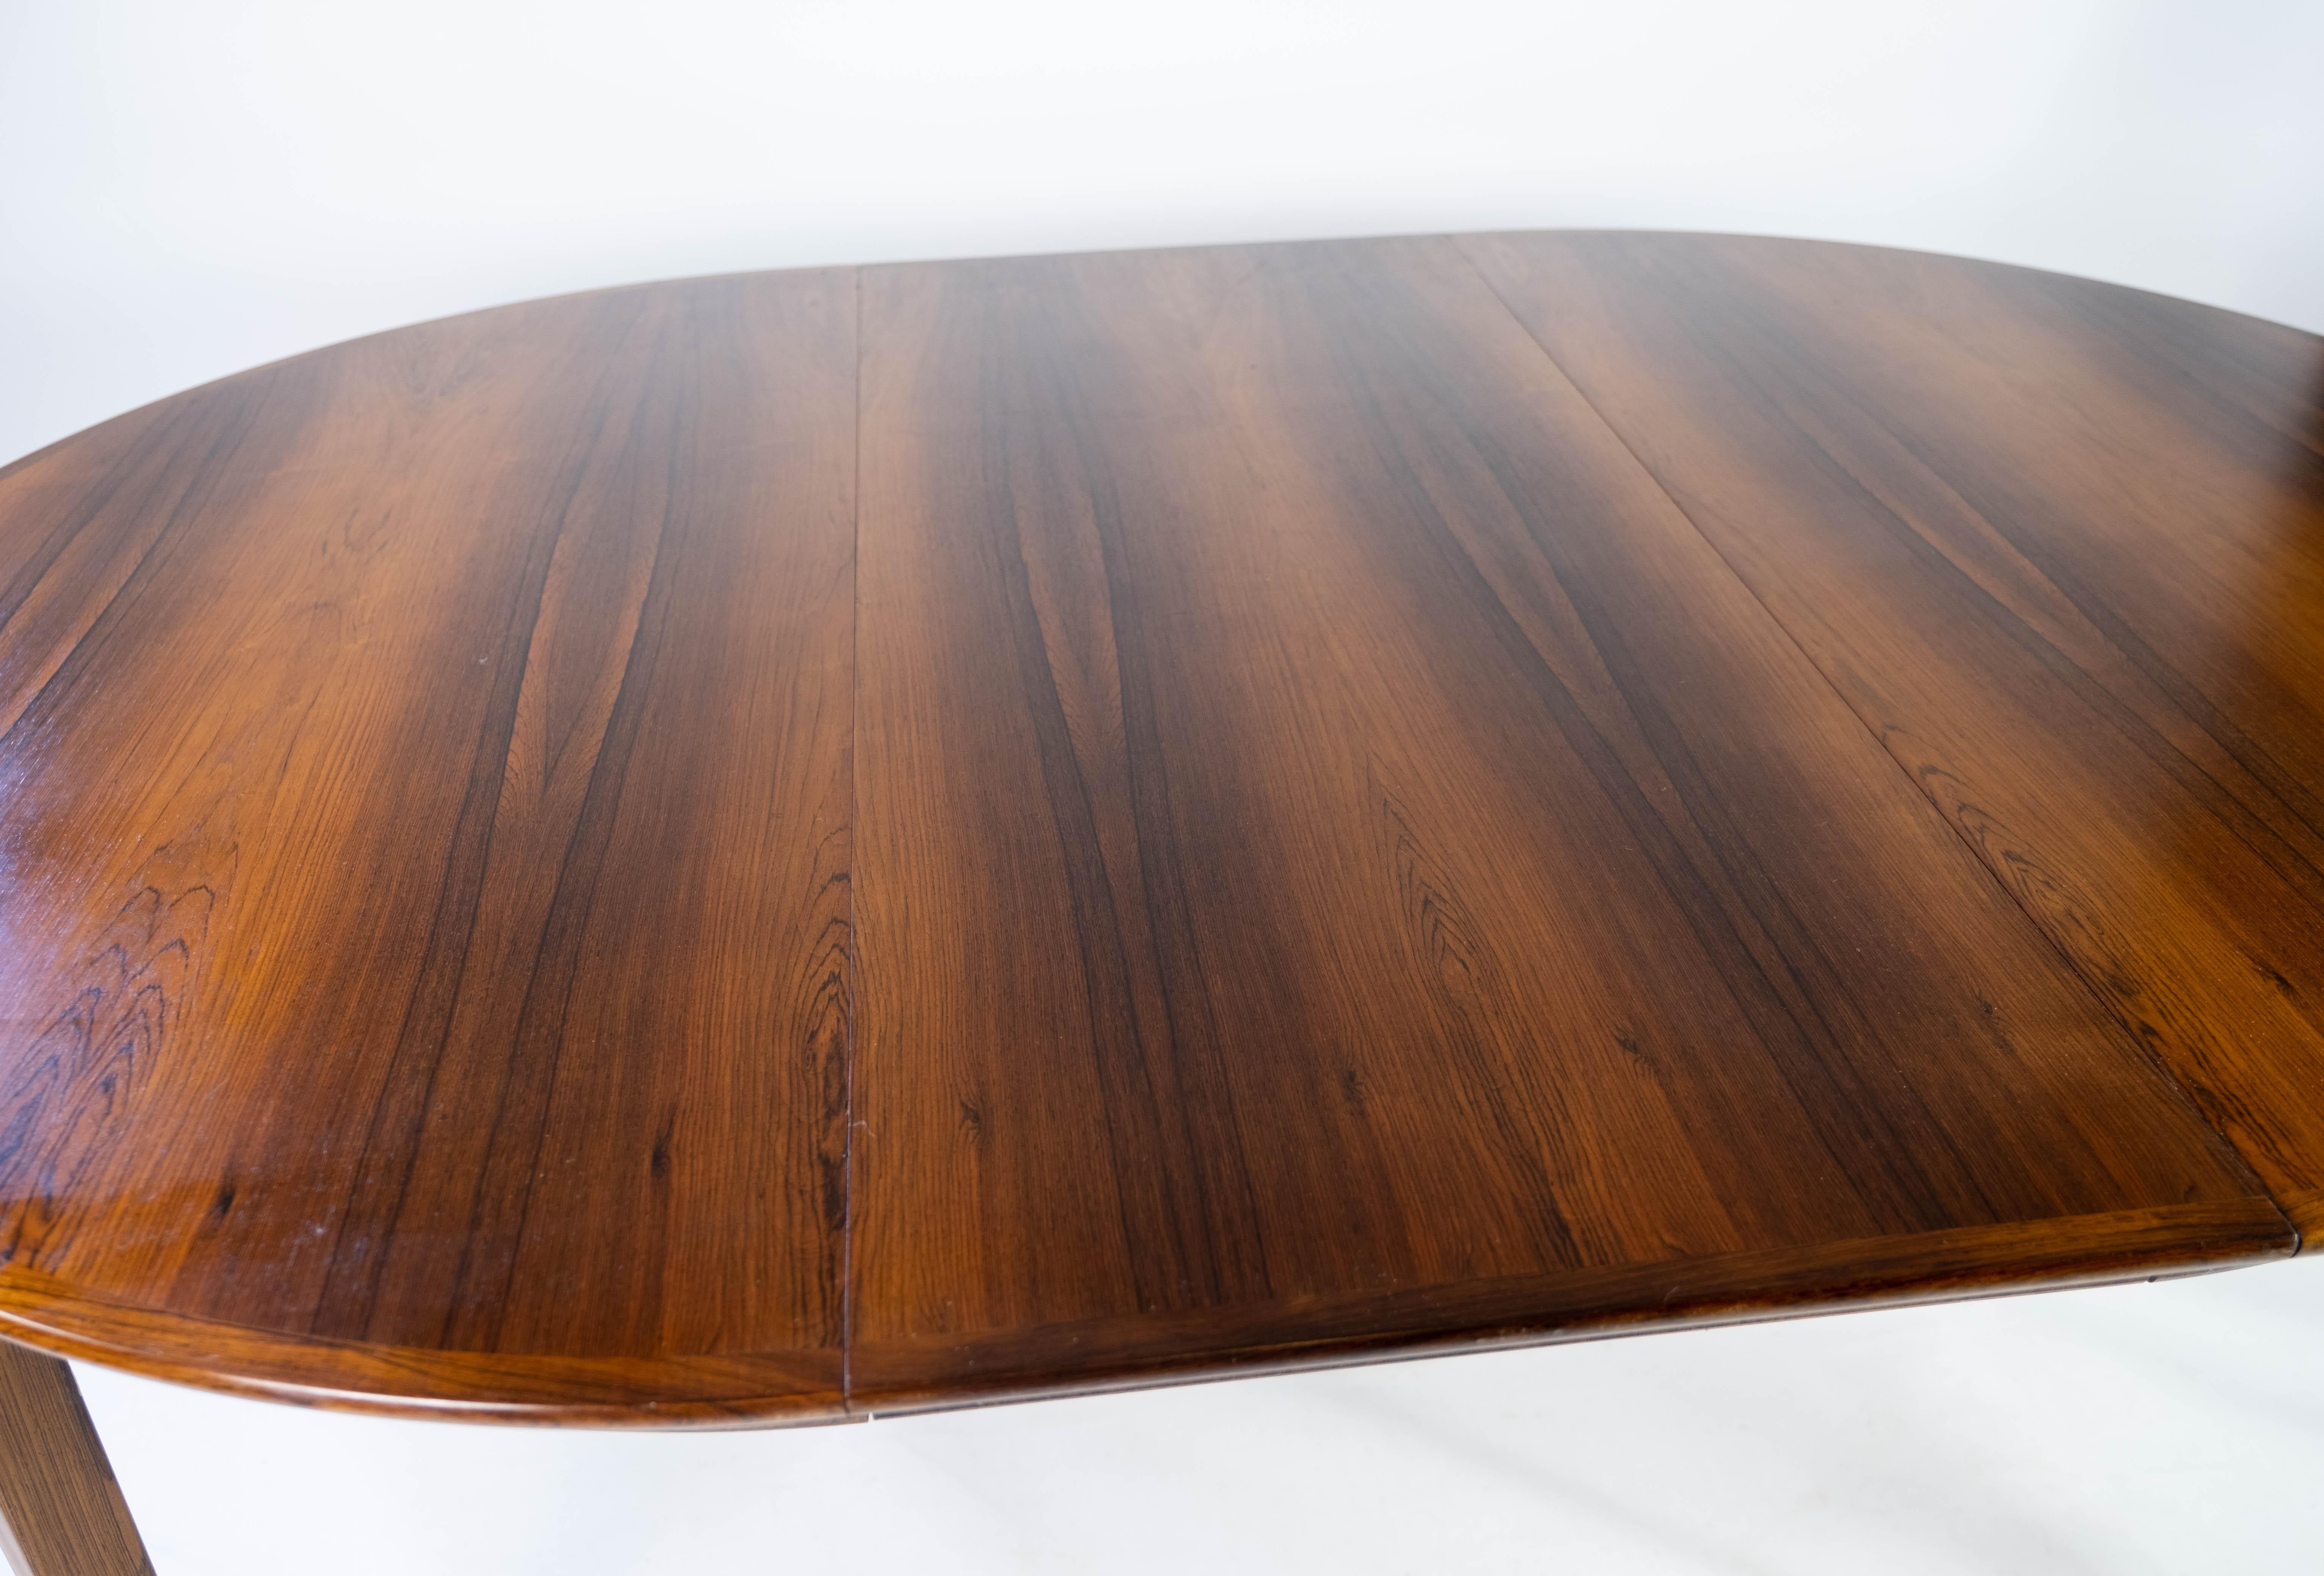 Dining Table Made In Rosewood With Extension Plates, Danish Design From 1960s For Sale 4